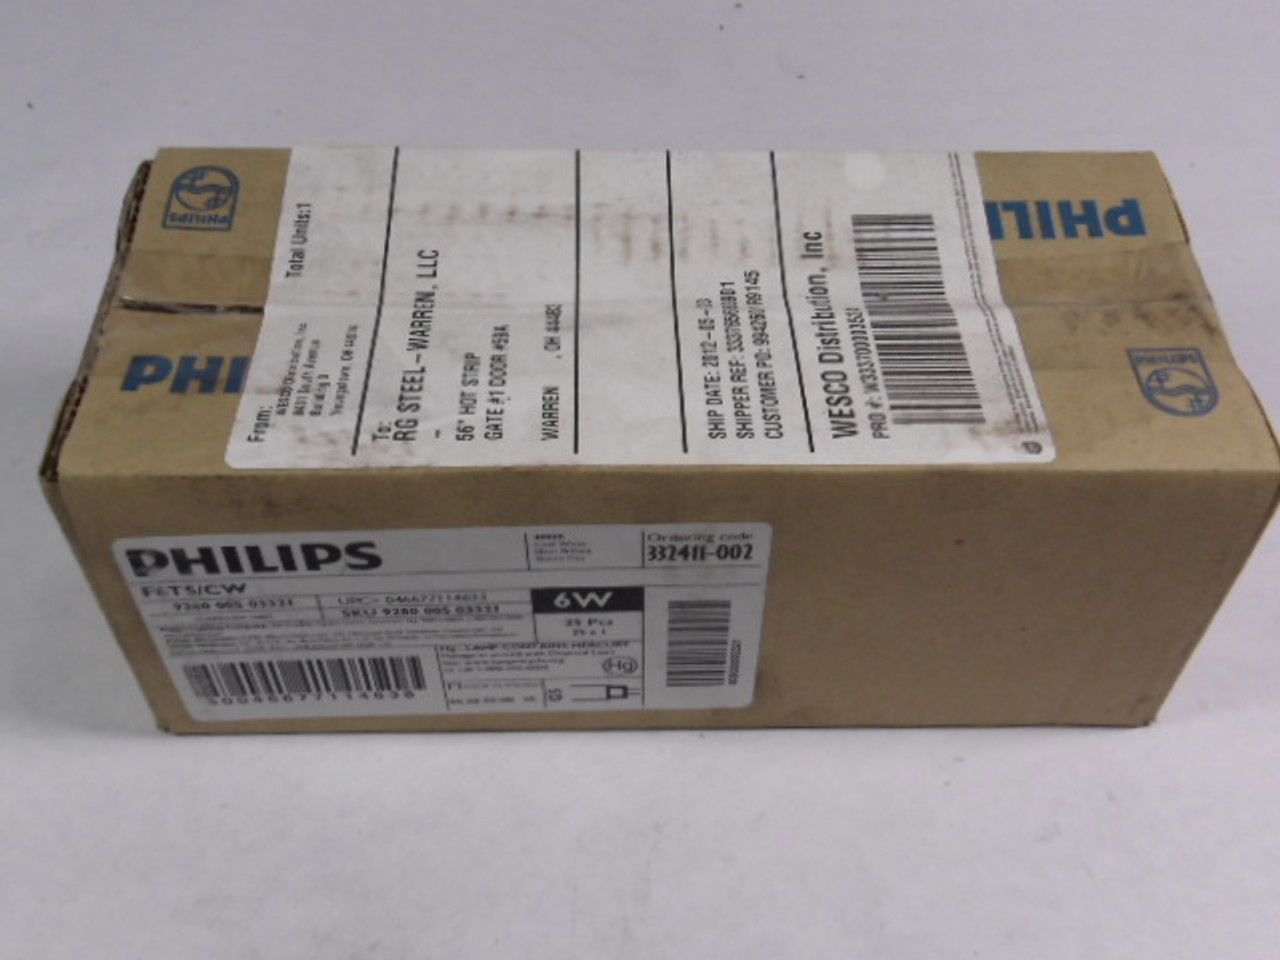 Philips F6T5/CW Fluorescent Lamp 6W 200L Pack of 25 ! NEW !